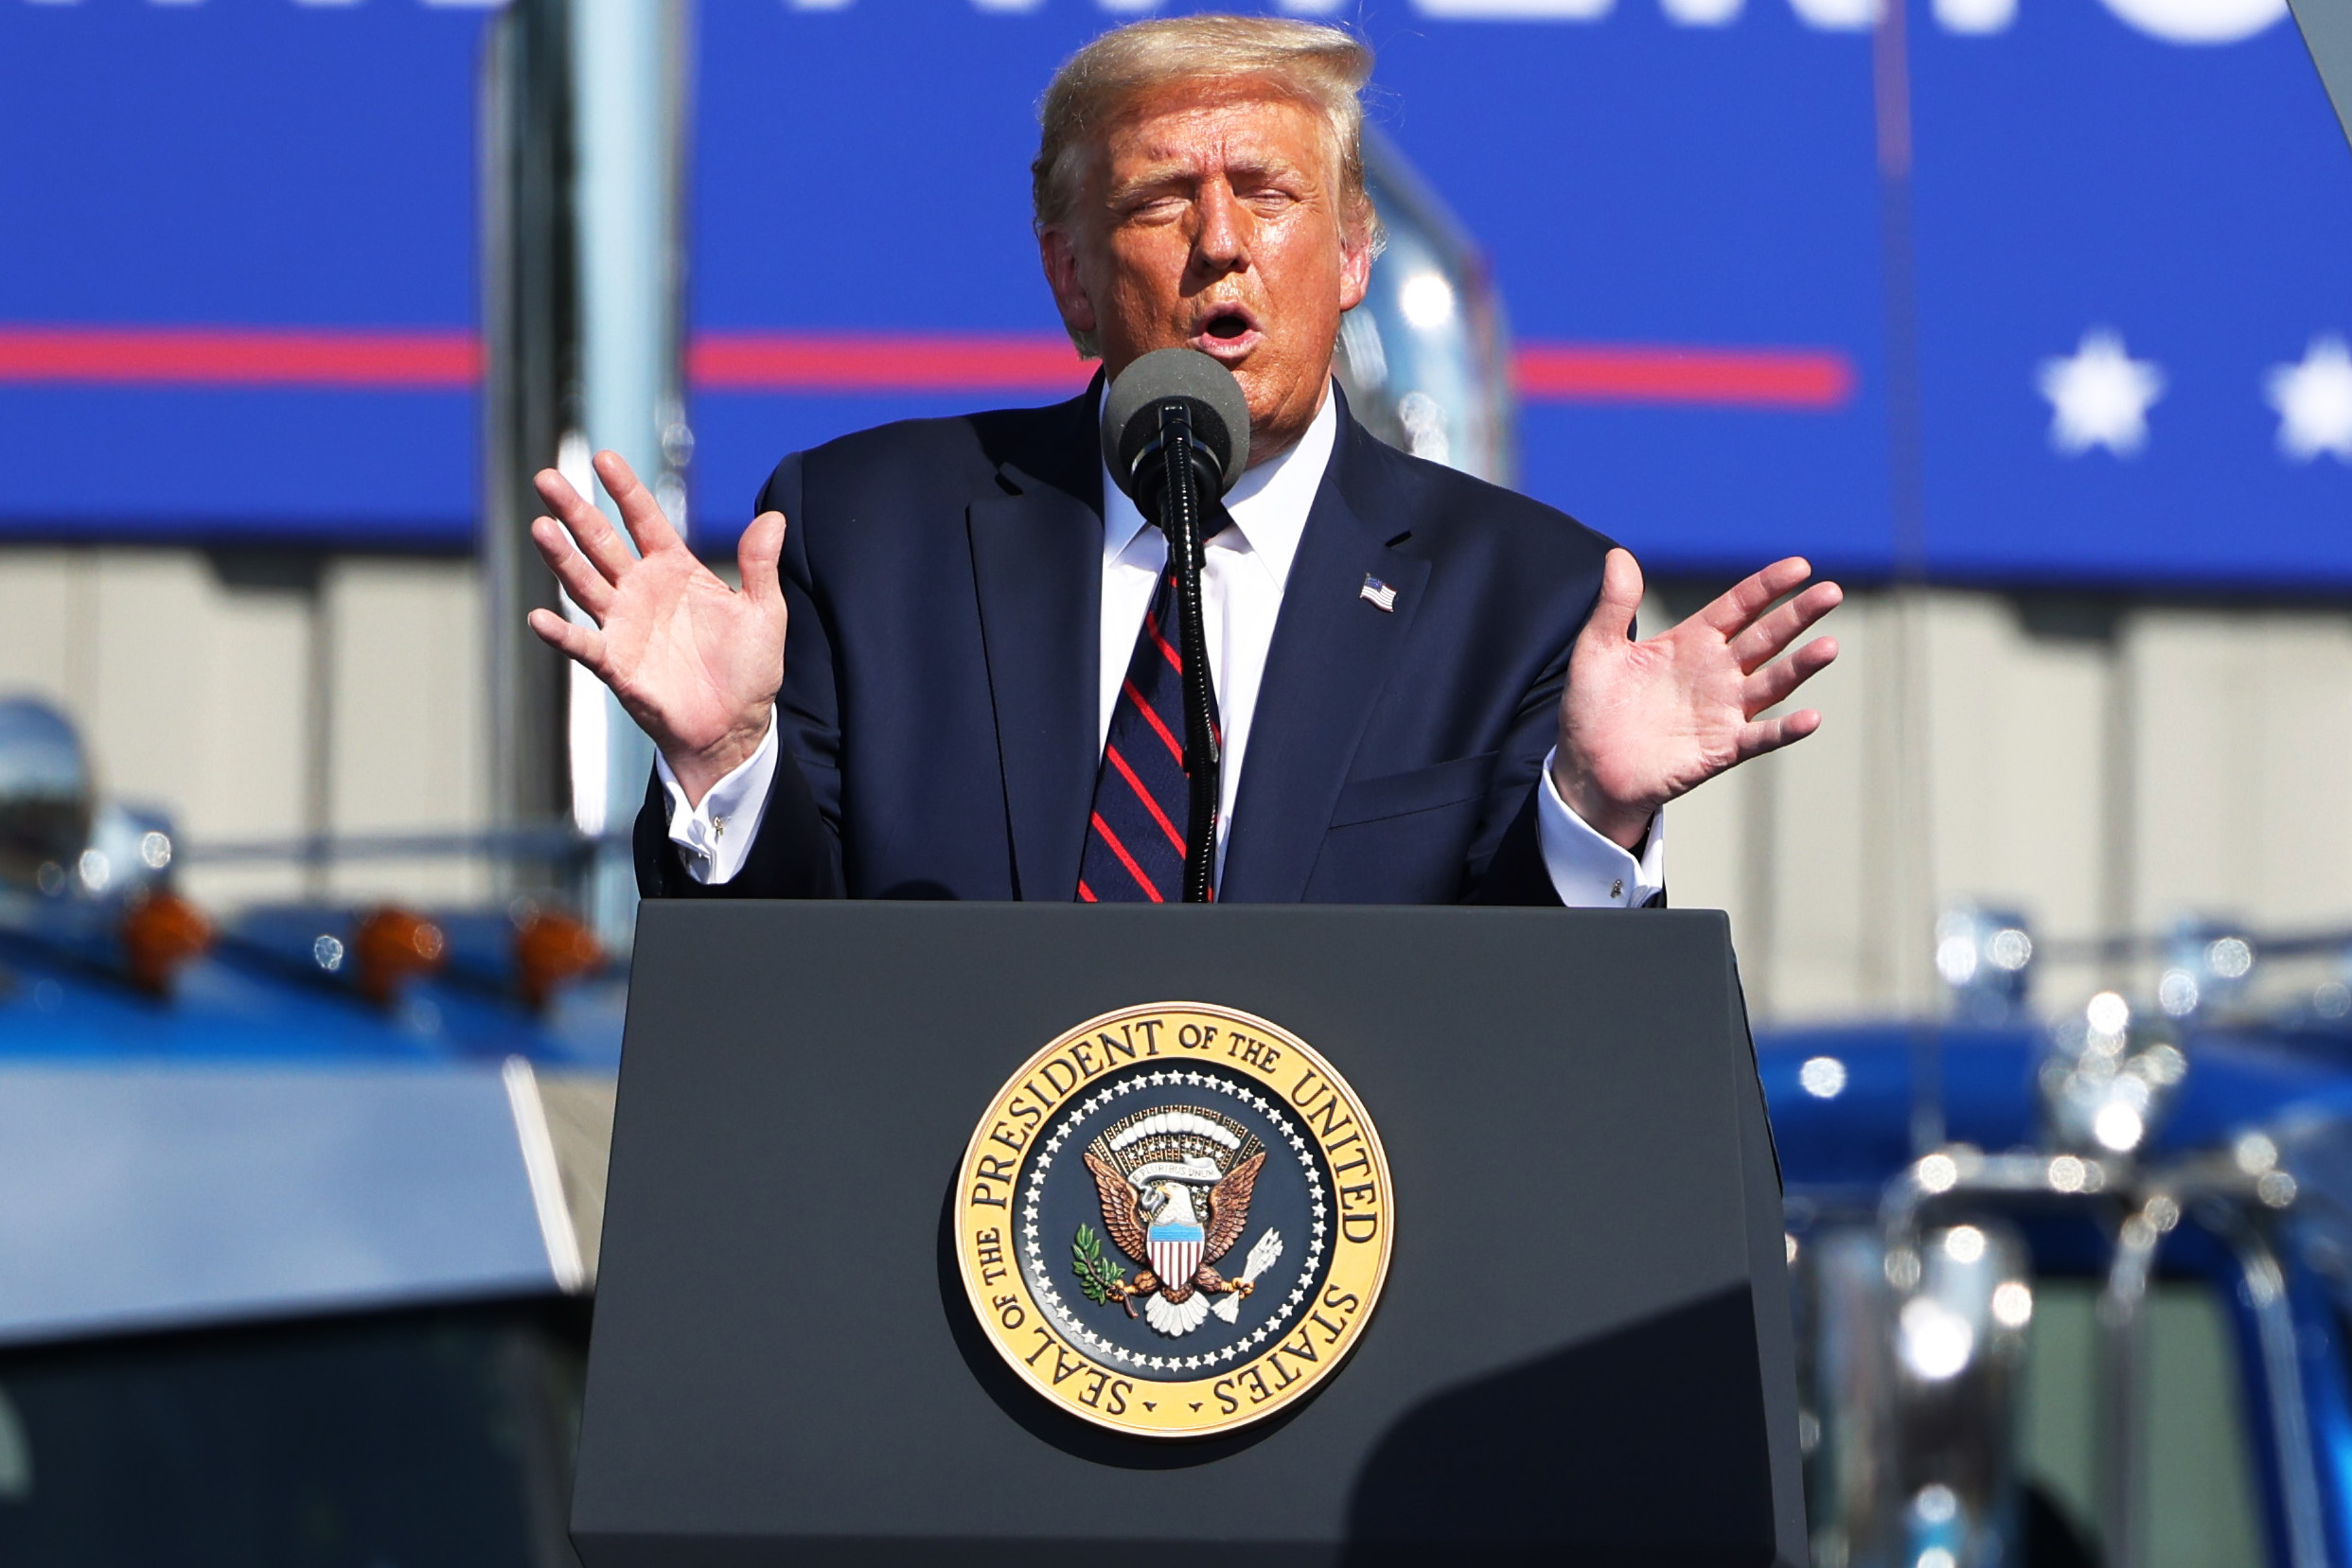 OLD FORGE, PENNSYLVANIA - AUGUST 20: U.S. President Donald J. Trump speaks at his campaign rally on August 20, 2020 in Old Forge, Pennsylvania. President Trump is campaigning in the battleground state of Pennsylvania near the hometown of former Vice President Joe Biden, hours before Biden will accept the Democratic Presidential nomination on the last day of the Democratic National Convention. (Photo by Michael M. Santiago/Getty Images)